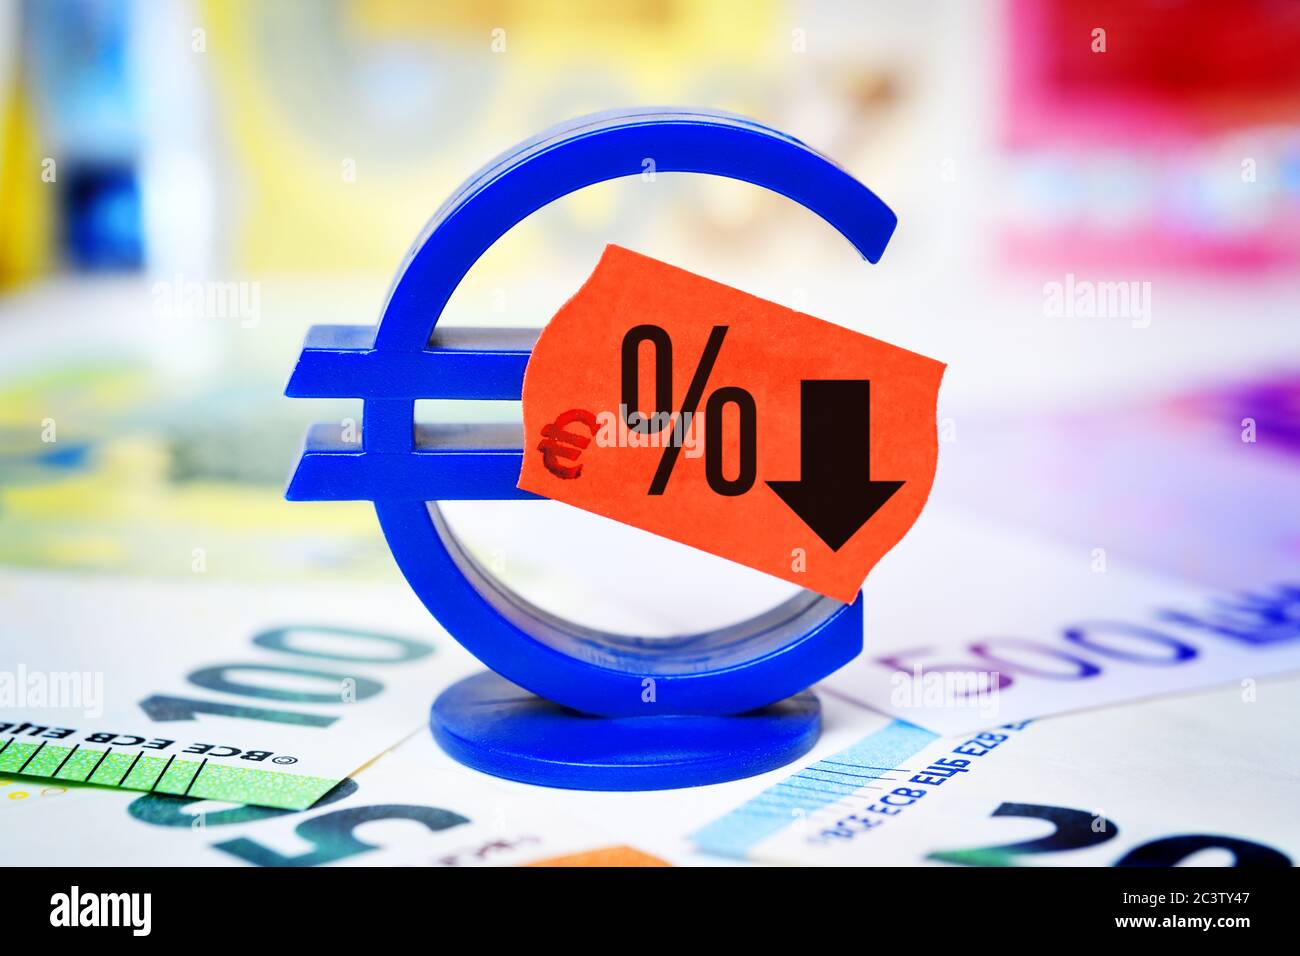 PHOTOMONTAGE, euro sign with price tag and percent sign, symbol photo for reduced value added tax to stimulate the economy, FOTOMONTAGE, Eurozeichen m Stock Photo